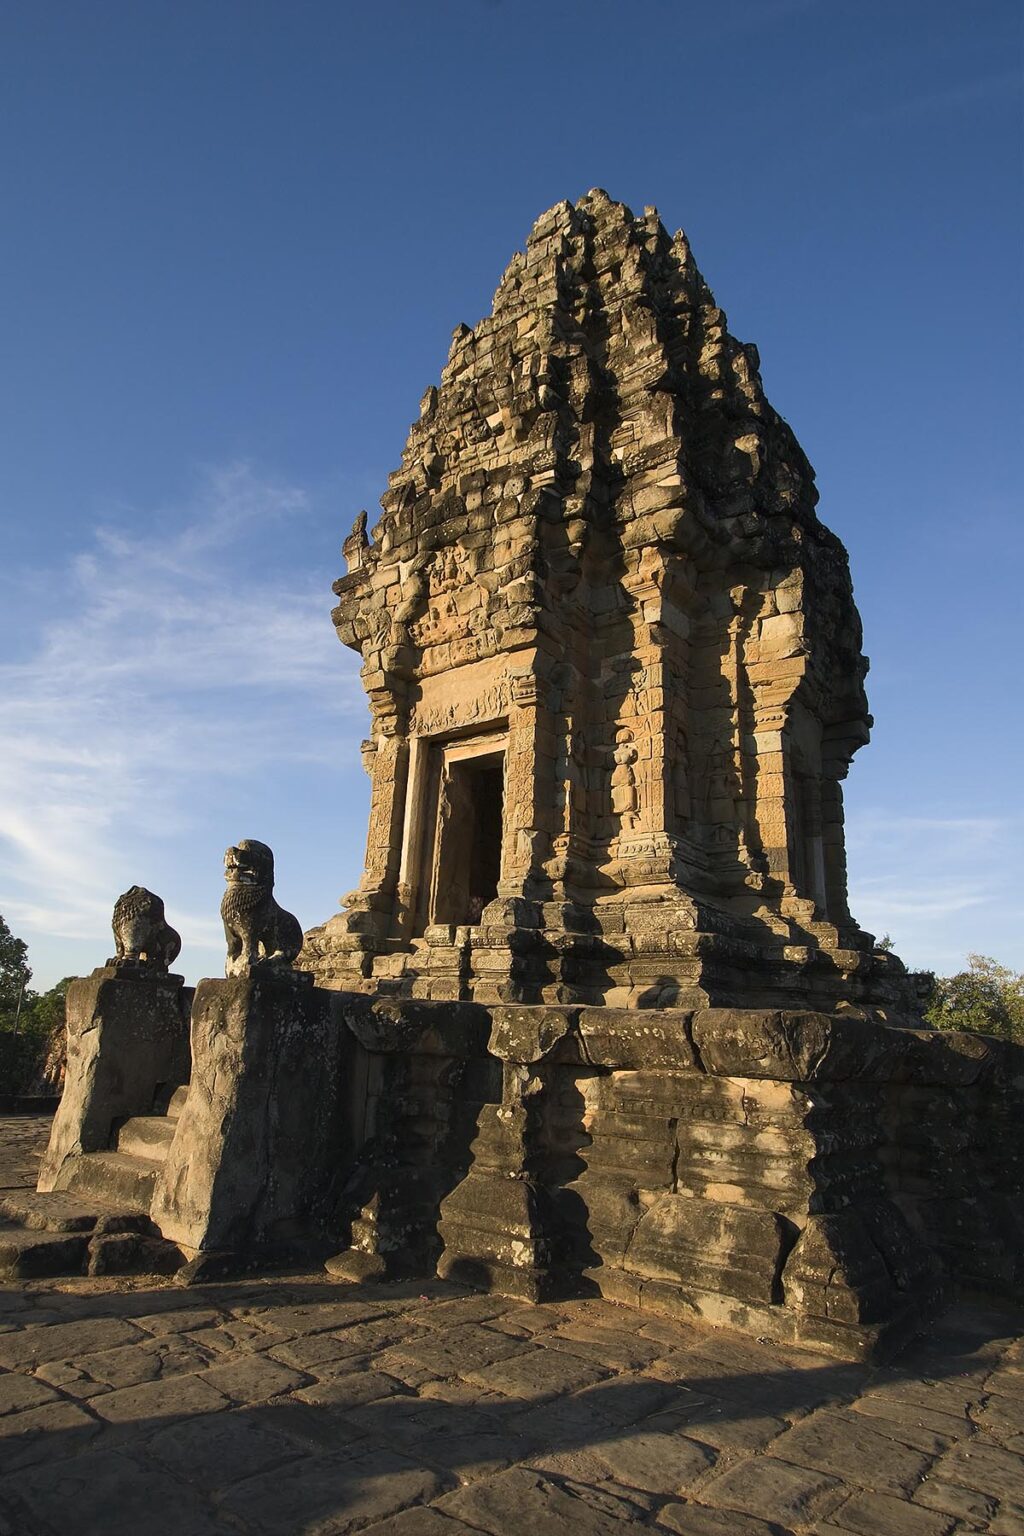 Central Hindu temple at Bakong, the 9th century state Hindu temple of Indravarman I in the Roluos District of Angkor Wat - Cambodia